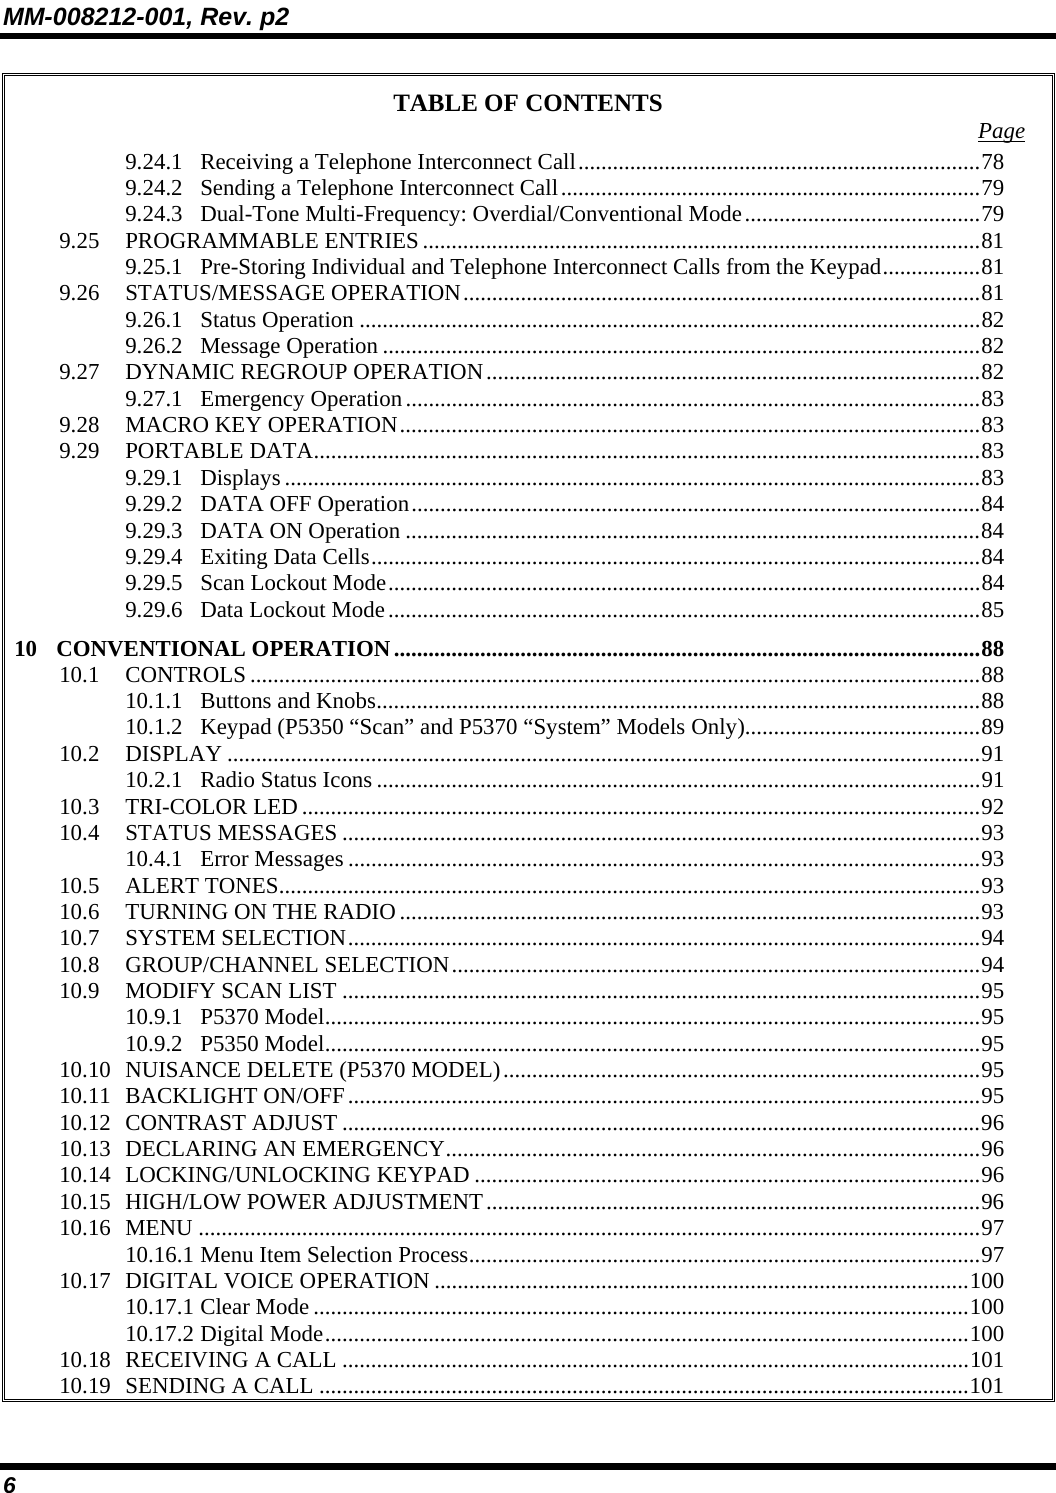 MM-008212-001, Rev. p2 6 TABLE OF CONTENTS  Page 9.24.1 Receiving a Telephone Interconnect Call......................................................................78 9.24.2 Sending a Telephone Interconnect Call.........................................................................79 9.24.3 Dual-Tone Multi-Frequency: Overdial/Conventional Mode.........................................79 9.25 PROGRAMMABLE ENTRIES .................................................................................................81 9.25.1 Pre-Storing Individual and Telephone Interconnect Calls from the Keypad.................81 9.26 STATUS/MESSAGE OPERATION..........................................................................................81 9.26.1 Status Operation ............................................................................................................82 9.26.2 Message Operation ........................................................................................................82 9.27 DYNAMIC REGROUP OPERATION......................................................................................82 9.27.1 Emergency Operation....................................................................................................83 9.28 MACRO KEY OPERATION.....................................................................................................83 9.29 PORTABLE DATA....................................................................................................................83 9.29.1 Displays .........................................................................................................................83 9.29.2 DATA OFF Operation...................................................................................................84 9.29.3 DATA ON Operation ....................................................................................................84 9.29.4 Exiting Data Cells..........................................................................................................84 9.29.5 Scan Lockout Mode.......................................................................................................84 9.29.6 Data Lockout Mode.......................................................................................................85 10 CONVENTIONAL OPERATION......................................................................................................88 10.1 CONTROLS ...............................................................................................................................88 10.1.1 Buttons and Knobs.........................................................................................................88 10.1.2 Keypad (P5350 “Scan” and P5370 “System” Models Only).........................................89 10.2 DISPLAY ...................................................................................................................................91 10.2.1 Radio Status Icons .........................................................................................................91 10.3 TRI-COLOR LED ......................................................................................................................92 10.4 STATUS MESSAGES ...............................................................................................................93 10.4.1 Error Messages ..............................................................................................................93 10.5 ALERT TONES..........................................................................................................................93 10.6 TURNING ON THE RADIO .....................................................................................................93 10.7 SYSTEM SELECTION..............................................................................................................94 10.8 GROUP/CHANNEL SELECTION............................................................................................94 10.9 MODIFY SCAN LIST ...............................................................................................................95 10.9.1 P5370 Model..................................................................................................................95 10.9.2 P5350 Model..................................................................................................................95 10.10 NUISANCE DELETE (P5370 MODEL)...................................................................................95 10.11 BACKLIGHT ON/OFF..............................................................................................................95 10.12 CONTRAST ADJUST ...............................................................................................................96 10.13 DECLARING AN EMERGENCY.............................................................................................96 10.14 LOCKING/UNLOCKING KEYPAD ........................................................................................96 10.15 HIGH/LOW POWER ADJUSTMENT......................................................................................96 10.16 MENU ........................................................................................................................................97 10.16.1 Menu Item Selection Process.........................................................................................97 10.17 DIGITAL VOICE OPERATION .............................................................................................100 10.17.1 Clear Mode ..................................................................................................................100 10.17.2 Digital Mode................................................................................................................100 10.18 RECEIVING A CALL .............................................................................................................101 10.19 SENDING A CALL .................................................................................................................101 